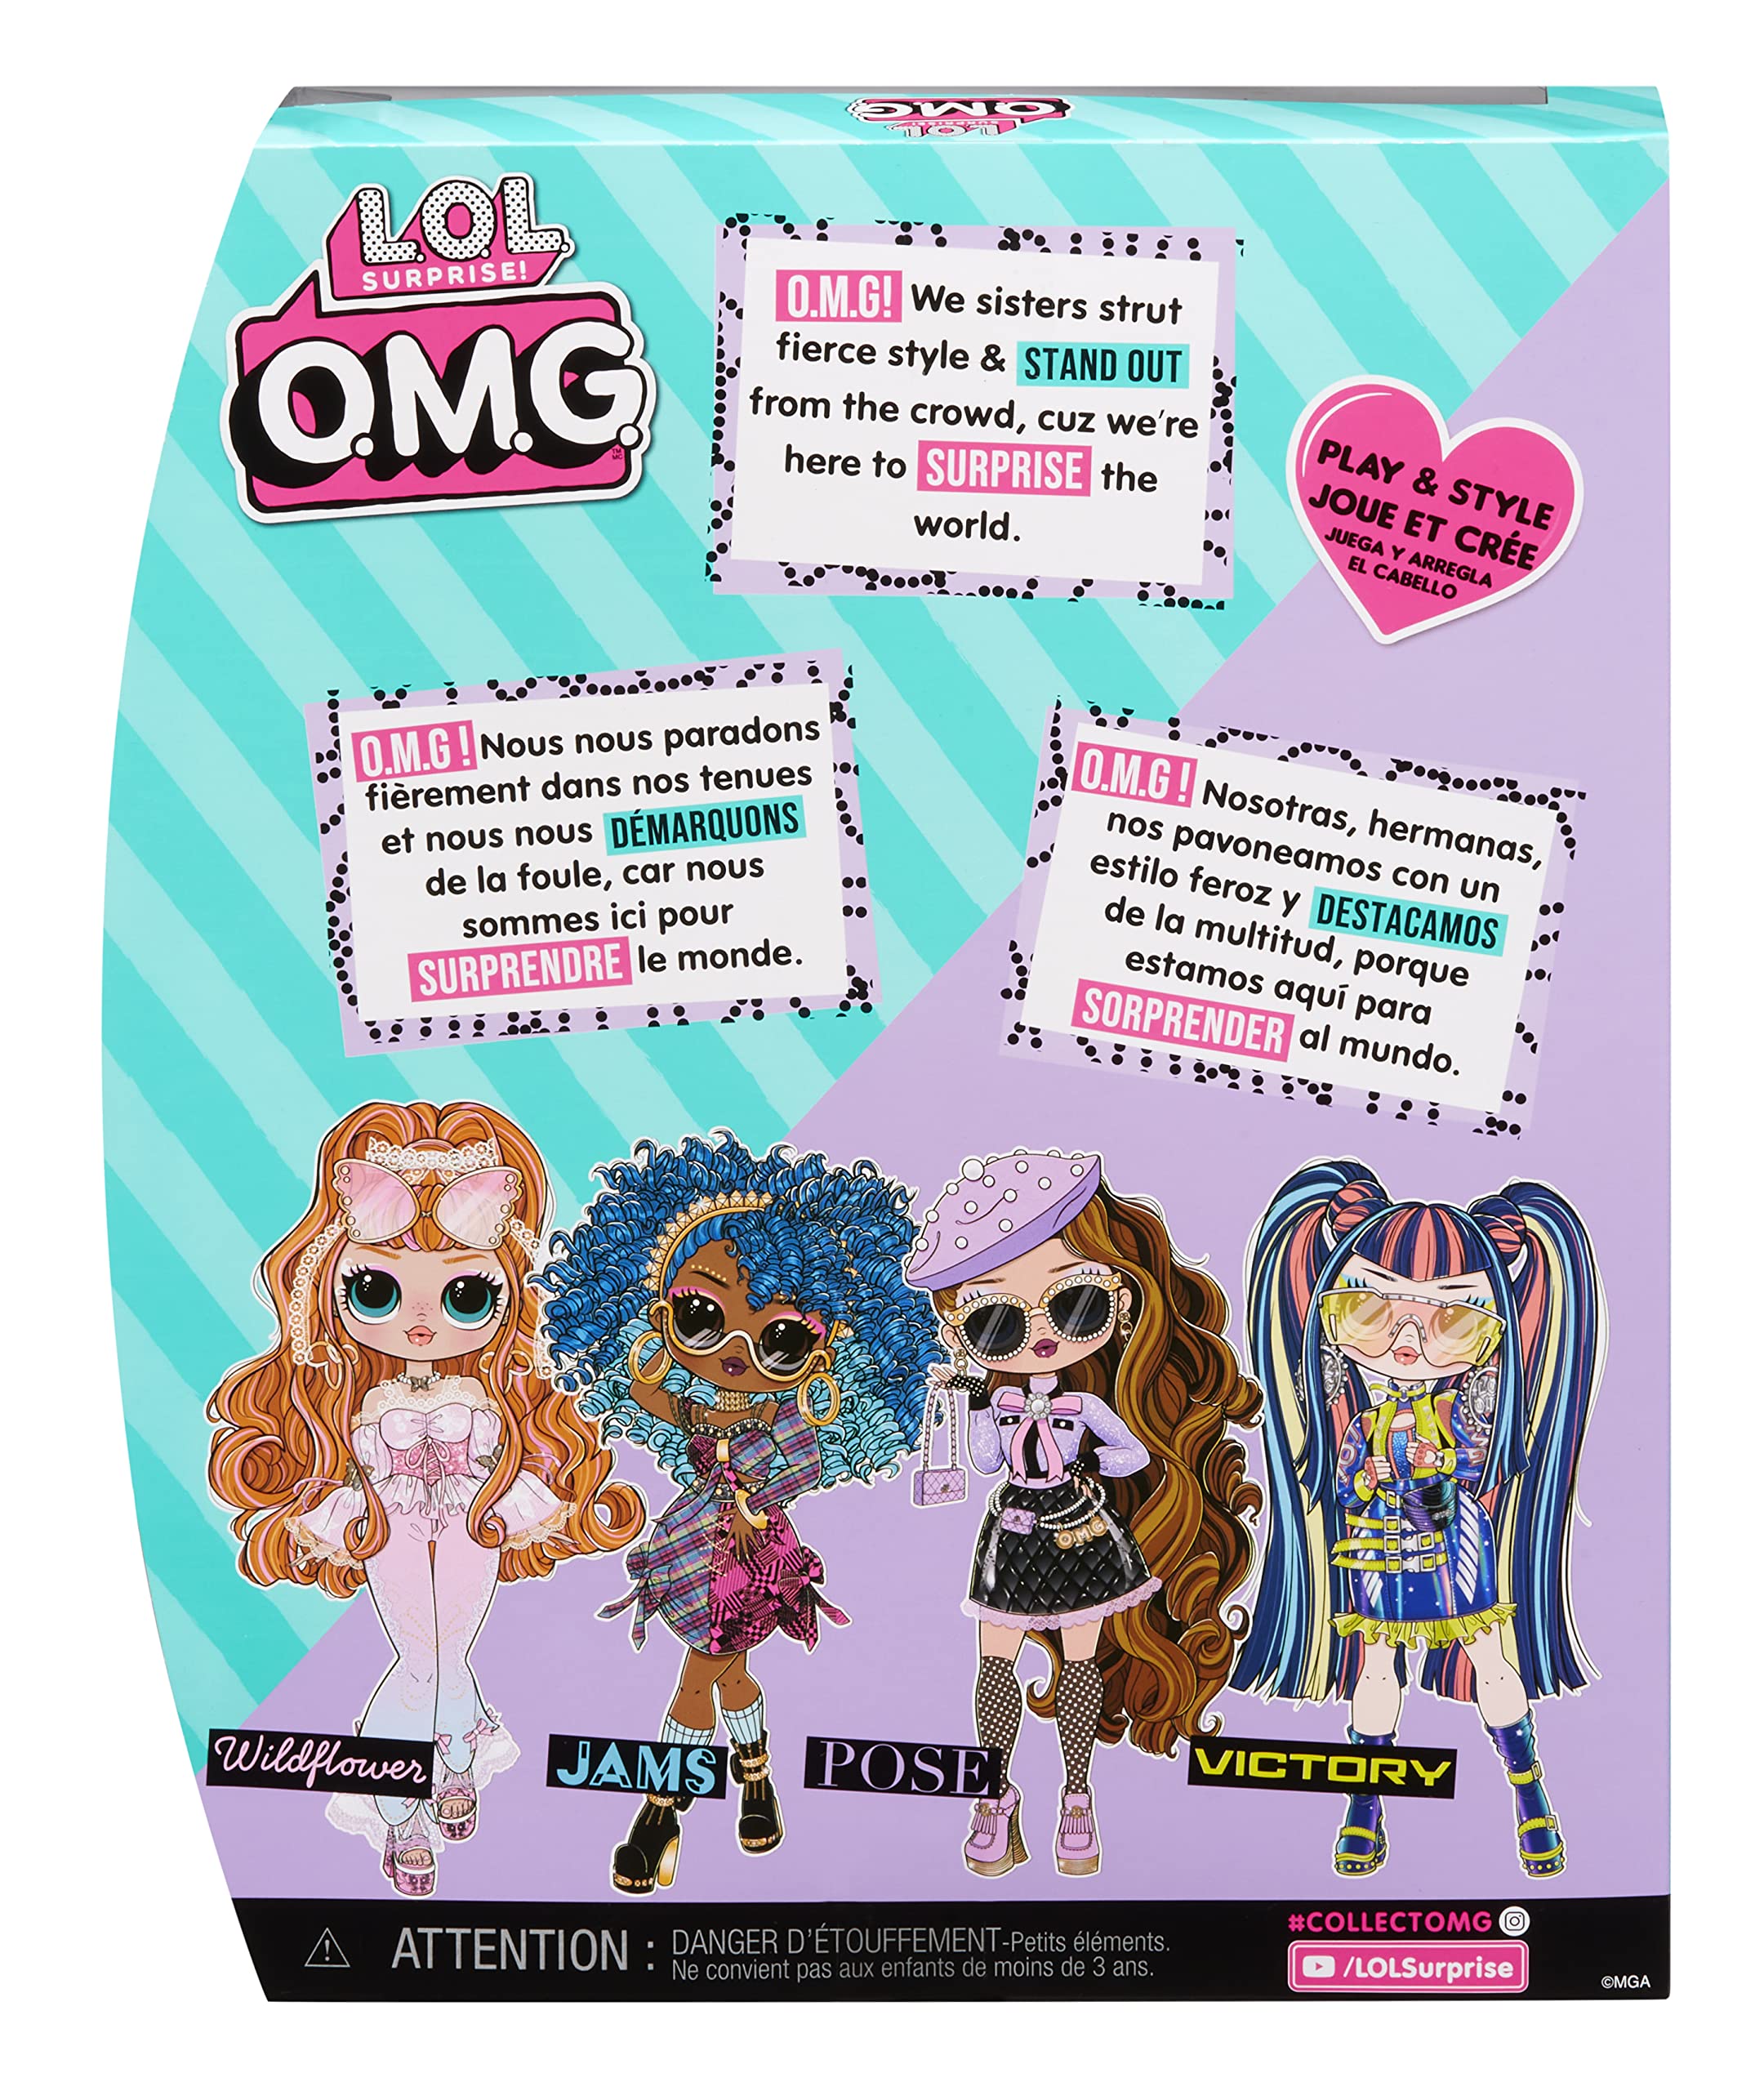 L.O.L. Surprise! LOL Surprise OMG Pose Fashion Doll with Multiple Surprises and Fabulous Accessories – Great Gift for Kids Ages 4+